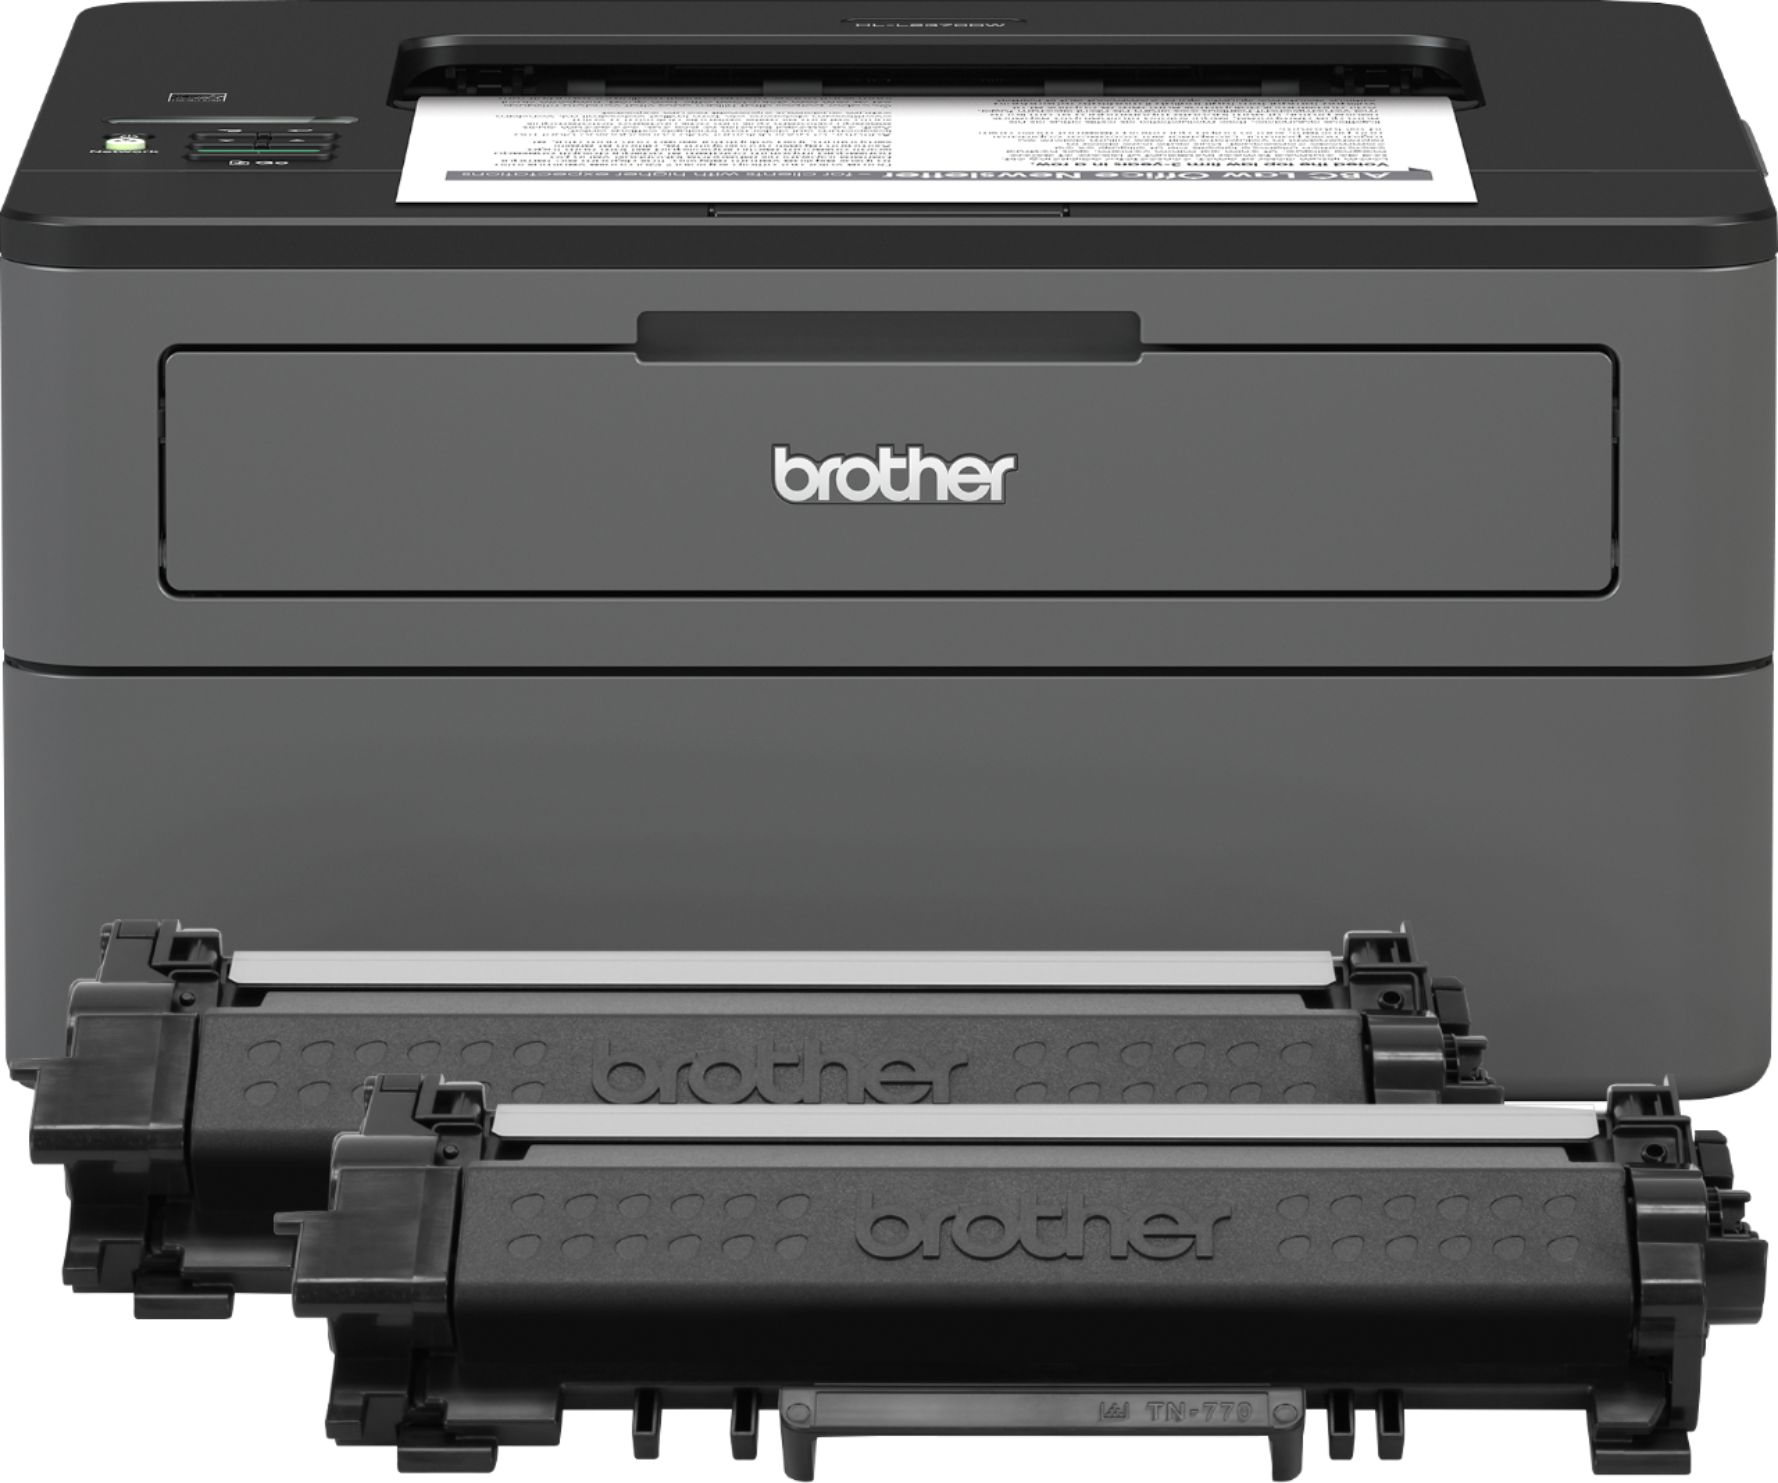 Brother HL-L2360DW review: A simple black laser printer with quick prints  and a future-proof design - CNET